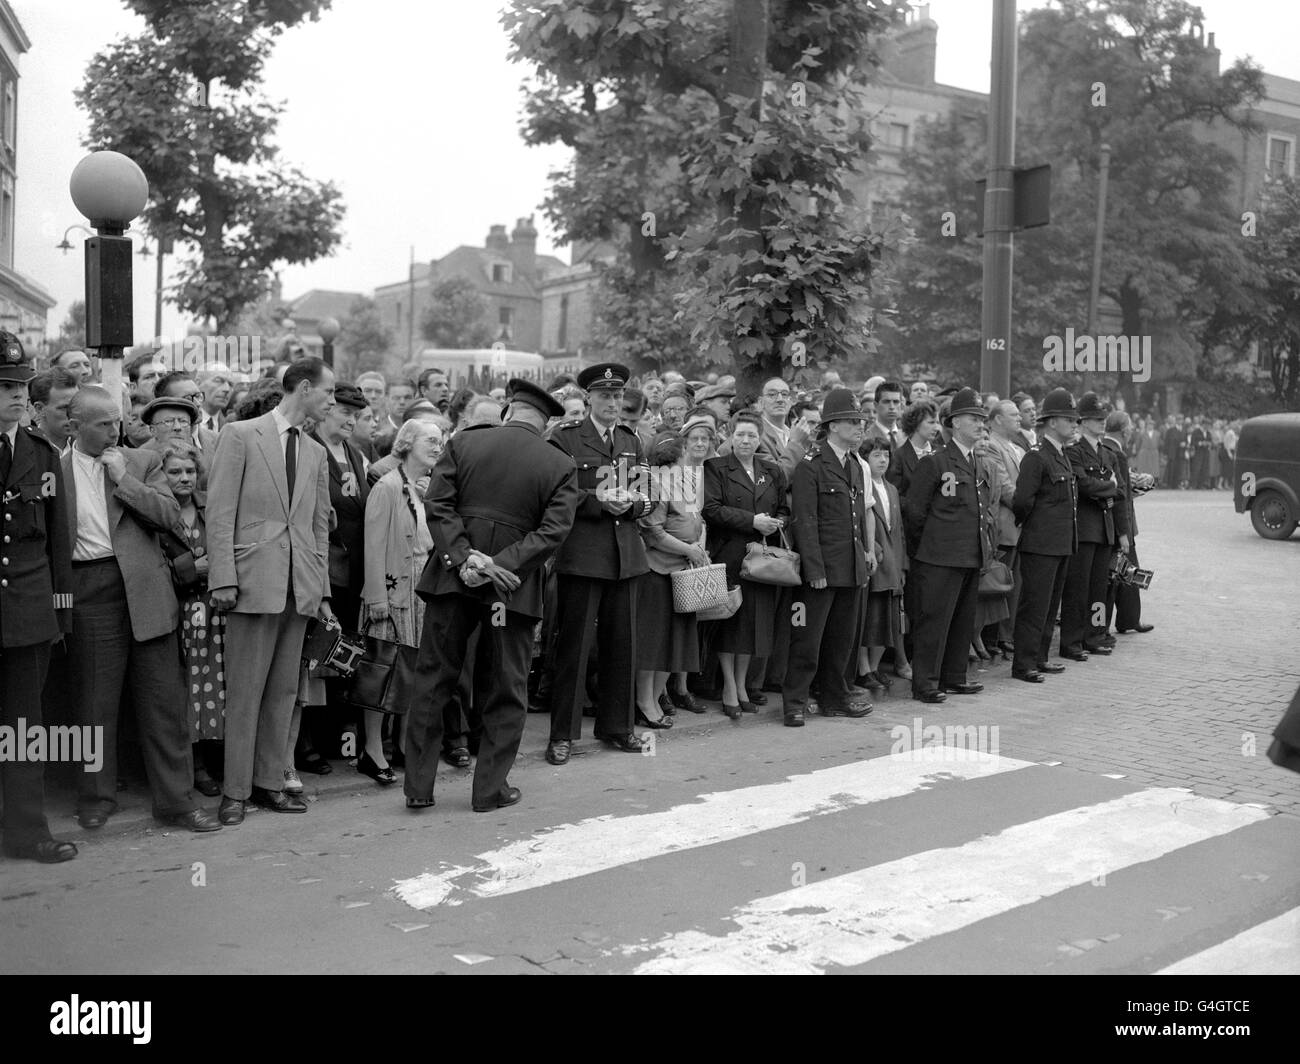 A line of police keeps the crowd from approaching the gates of Holloway Prison in London as Ruth Ellis is executed for the murder of her lover, racing car driver David Blakely. She was the last woman to be hanged in Britain. Stock Photo